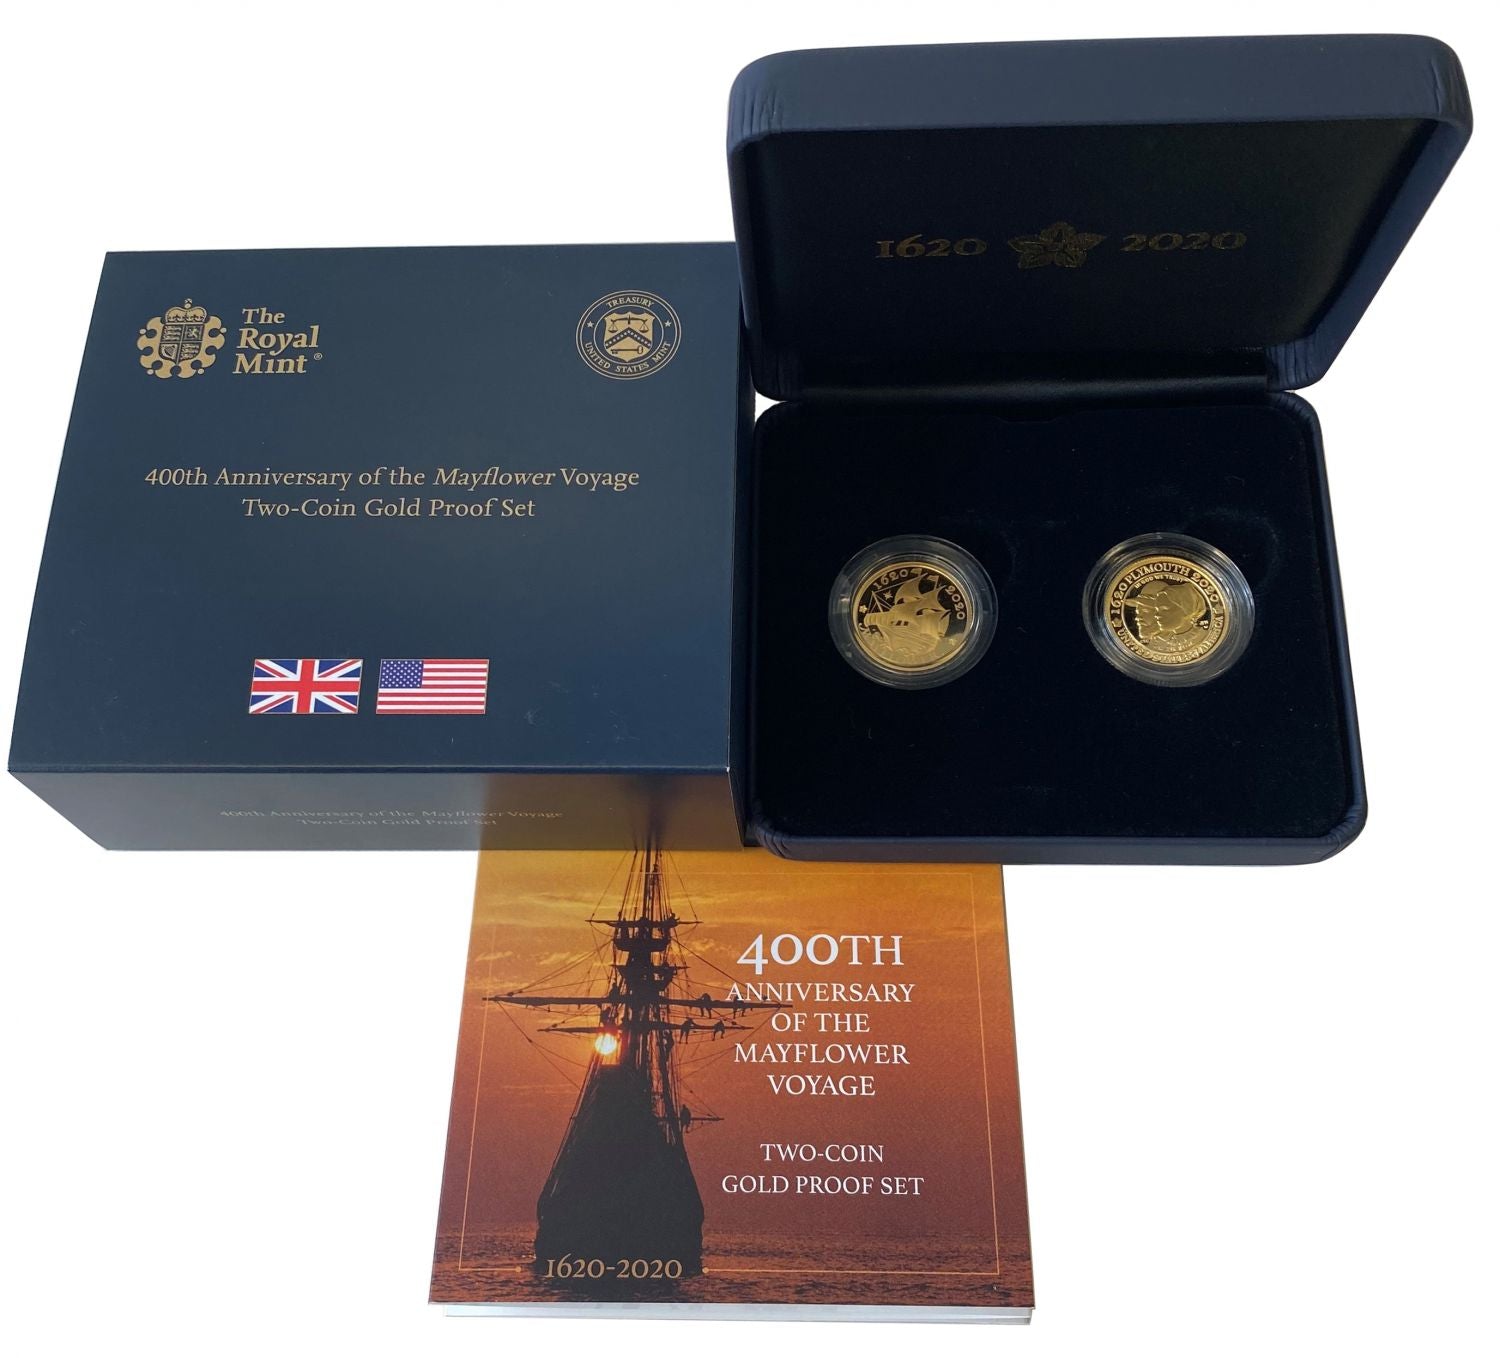 Mayflower US Mint and Royal Mint 2020 Two-Coin 1/4 Oz gold Proof Set - 400th Anniversary of the Mayflower Voyage